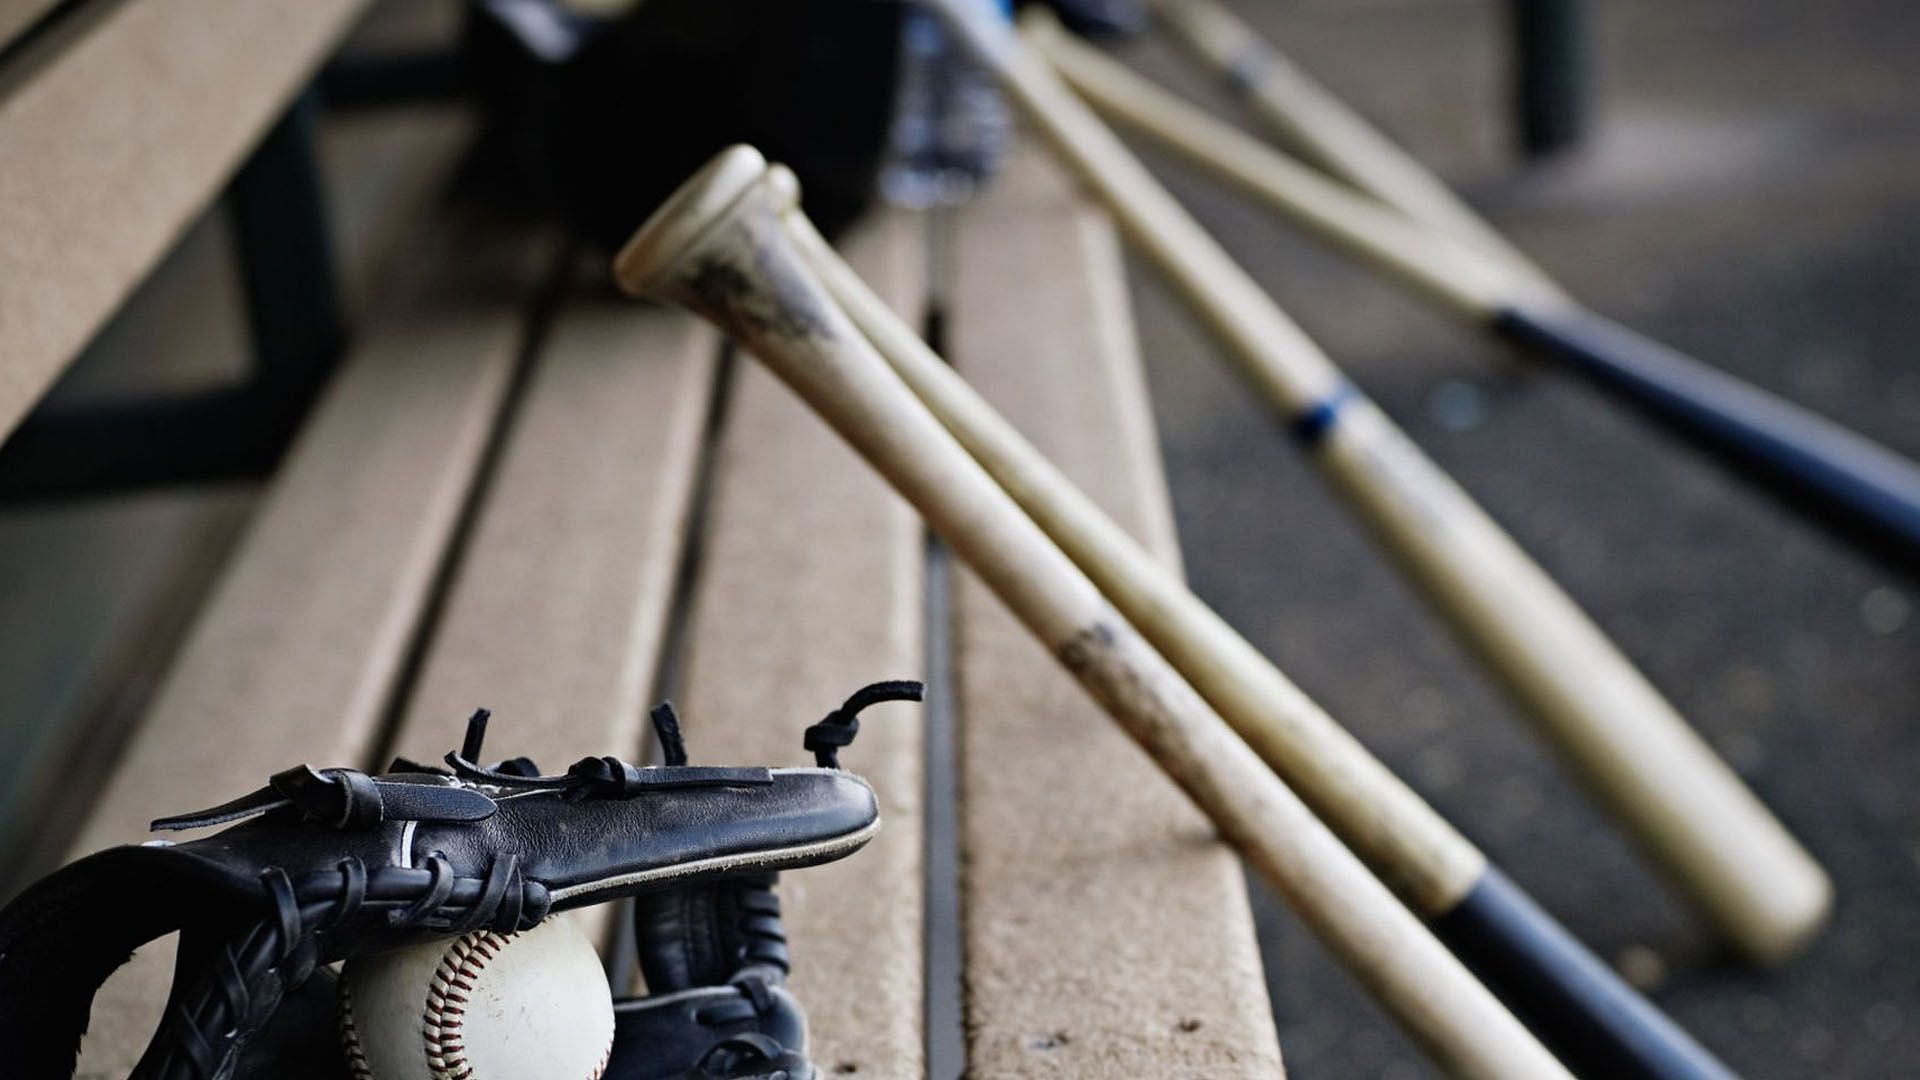 Student athlete Angel Mercado-Ocasio dies after a dugout collapse (Image via Getty images)